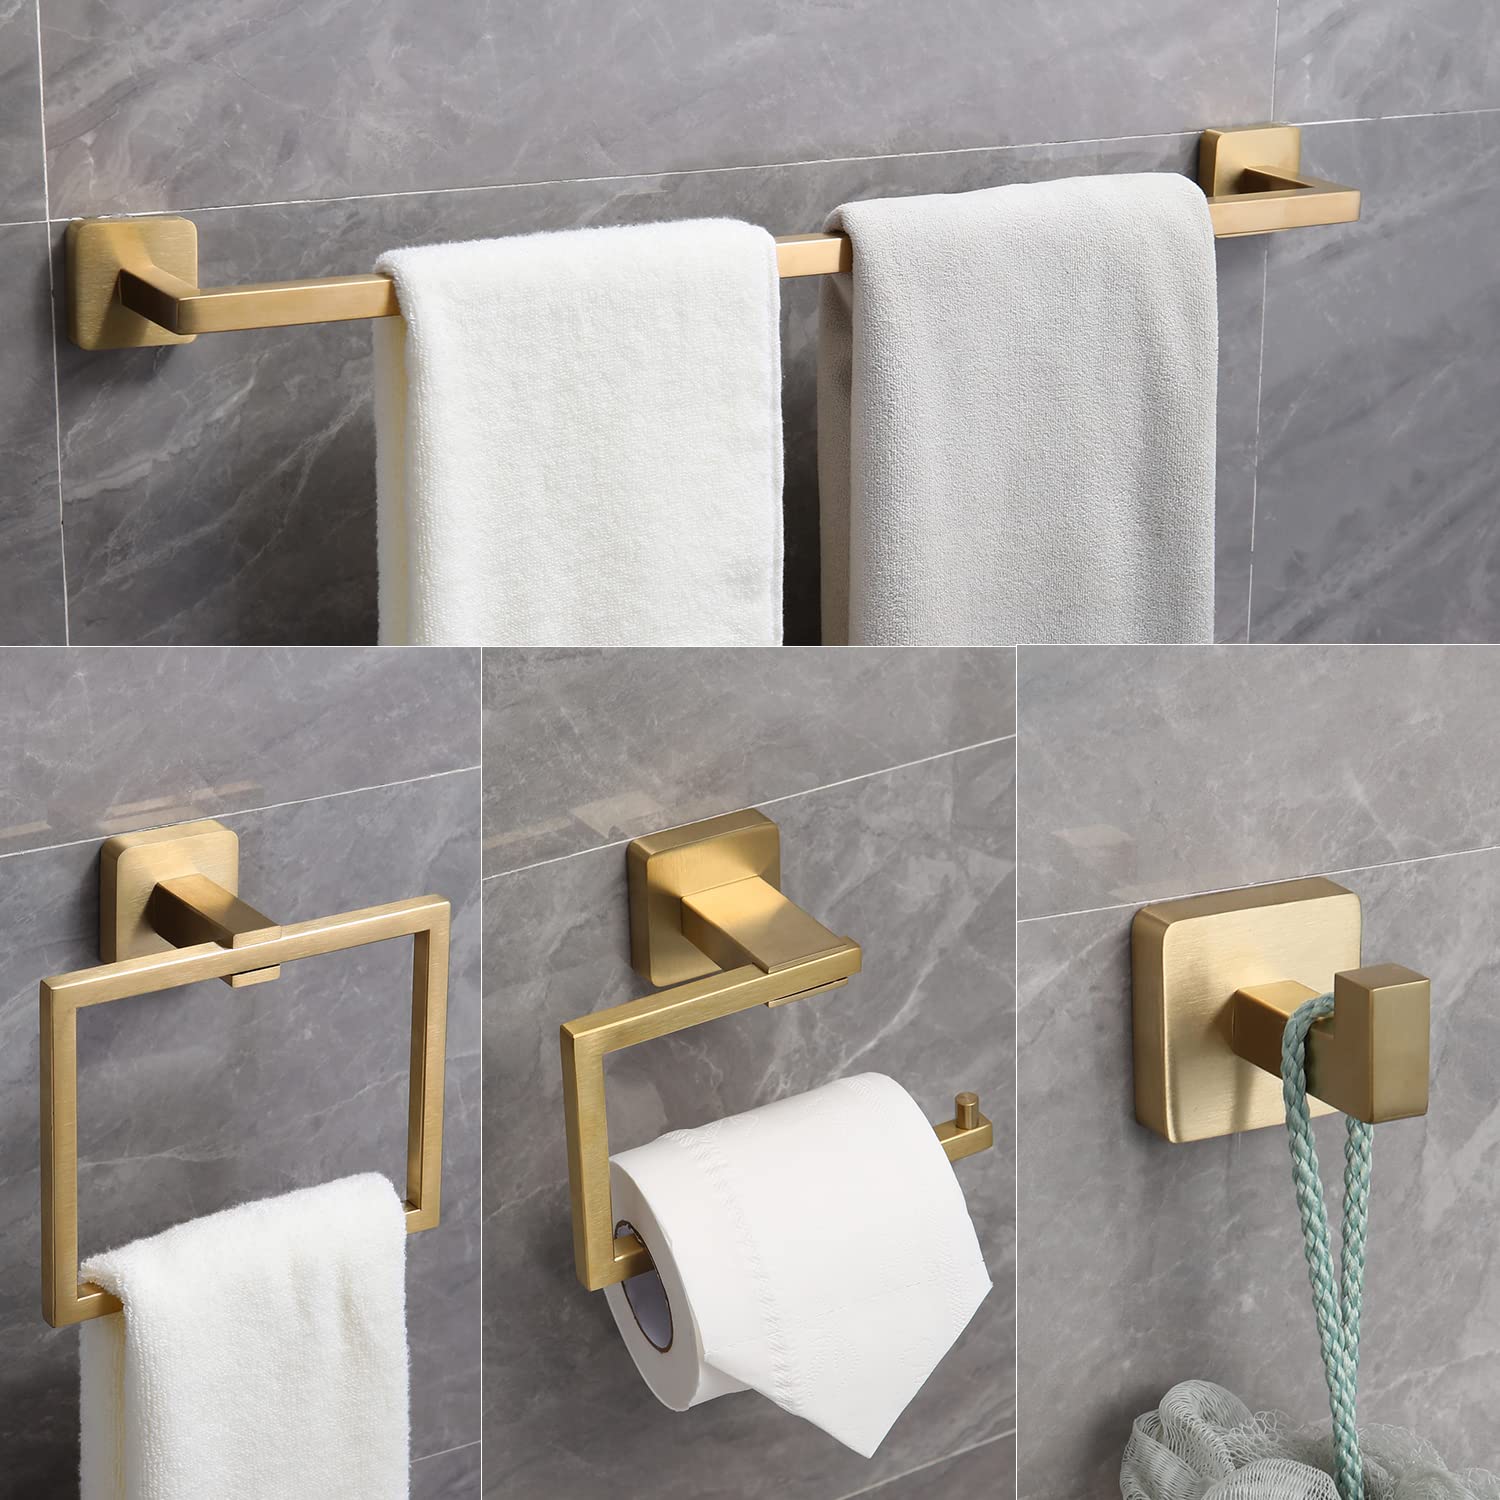 Ntipox 4 Pieces Brusehd Gold Bathroom Hardware Accessories Set,Stainless Steel Square 24" Hand Towel Bar Set Gold, Towel Rack Set Gold, Wall Mounted